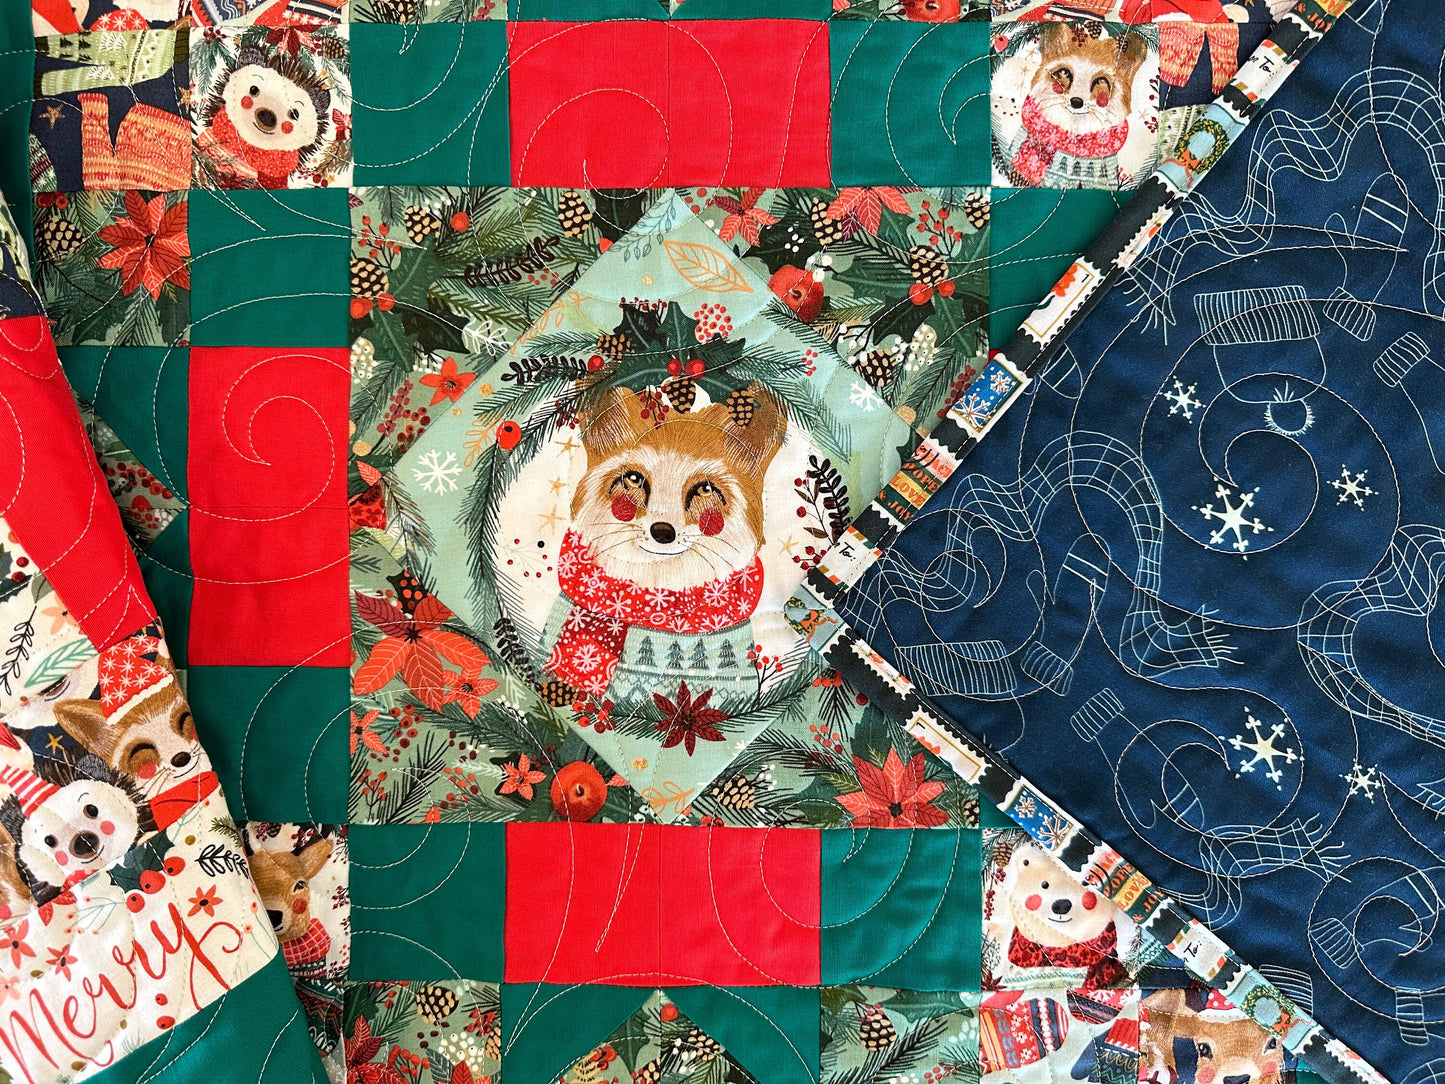 Cheerful Holiday Woodland Animal, Christmas Wreath Block, Full Size Quilt